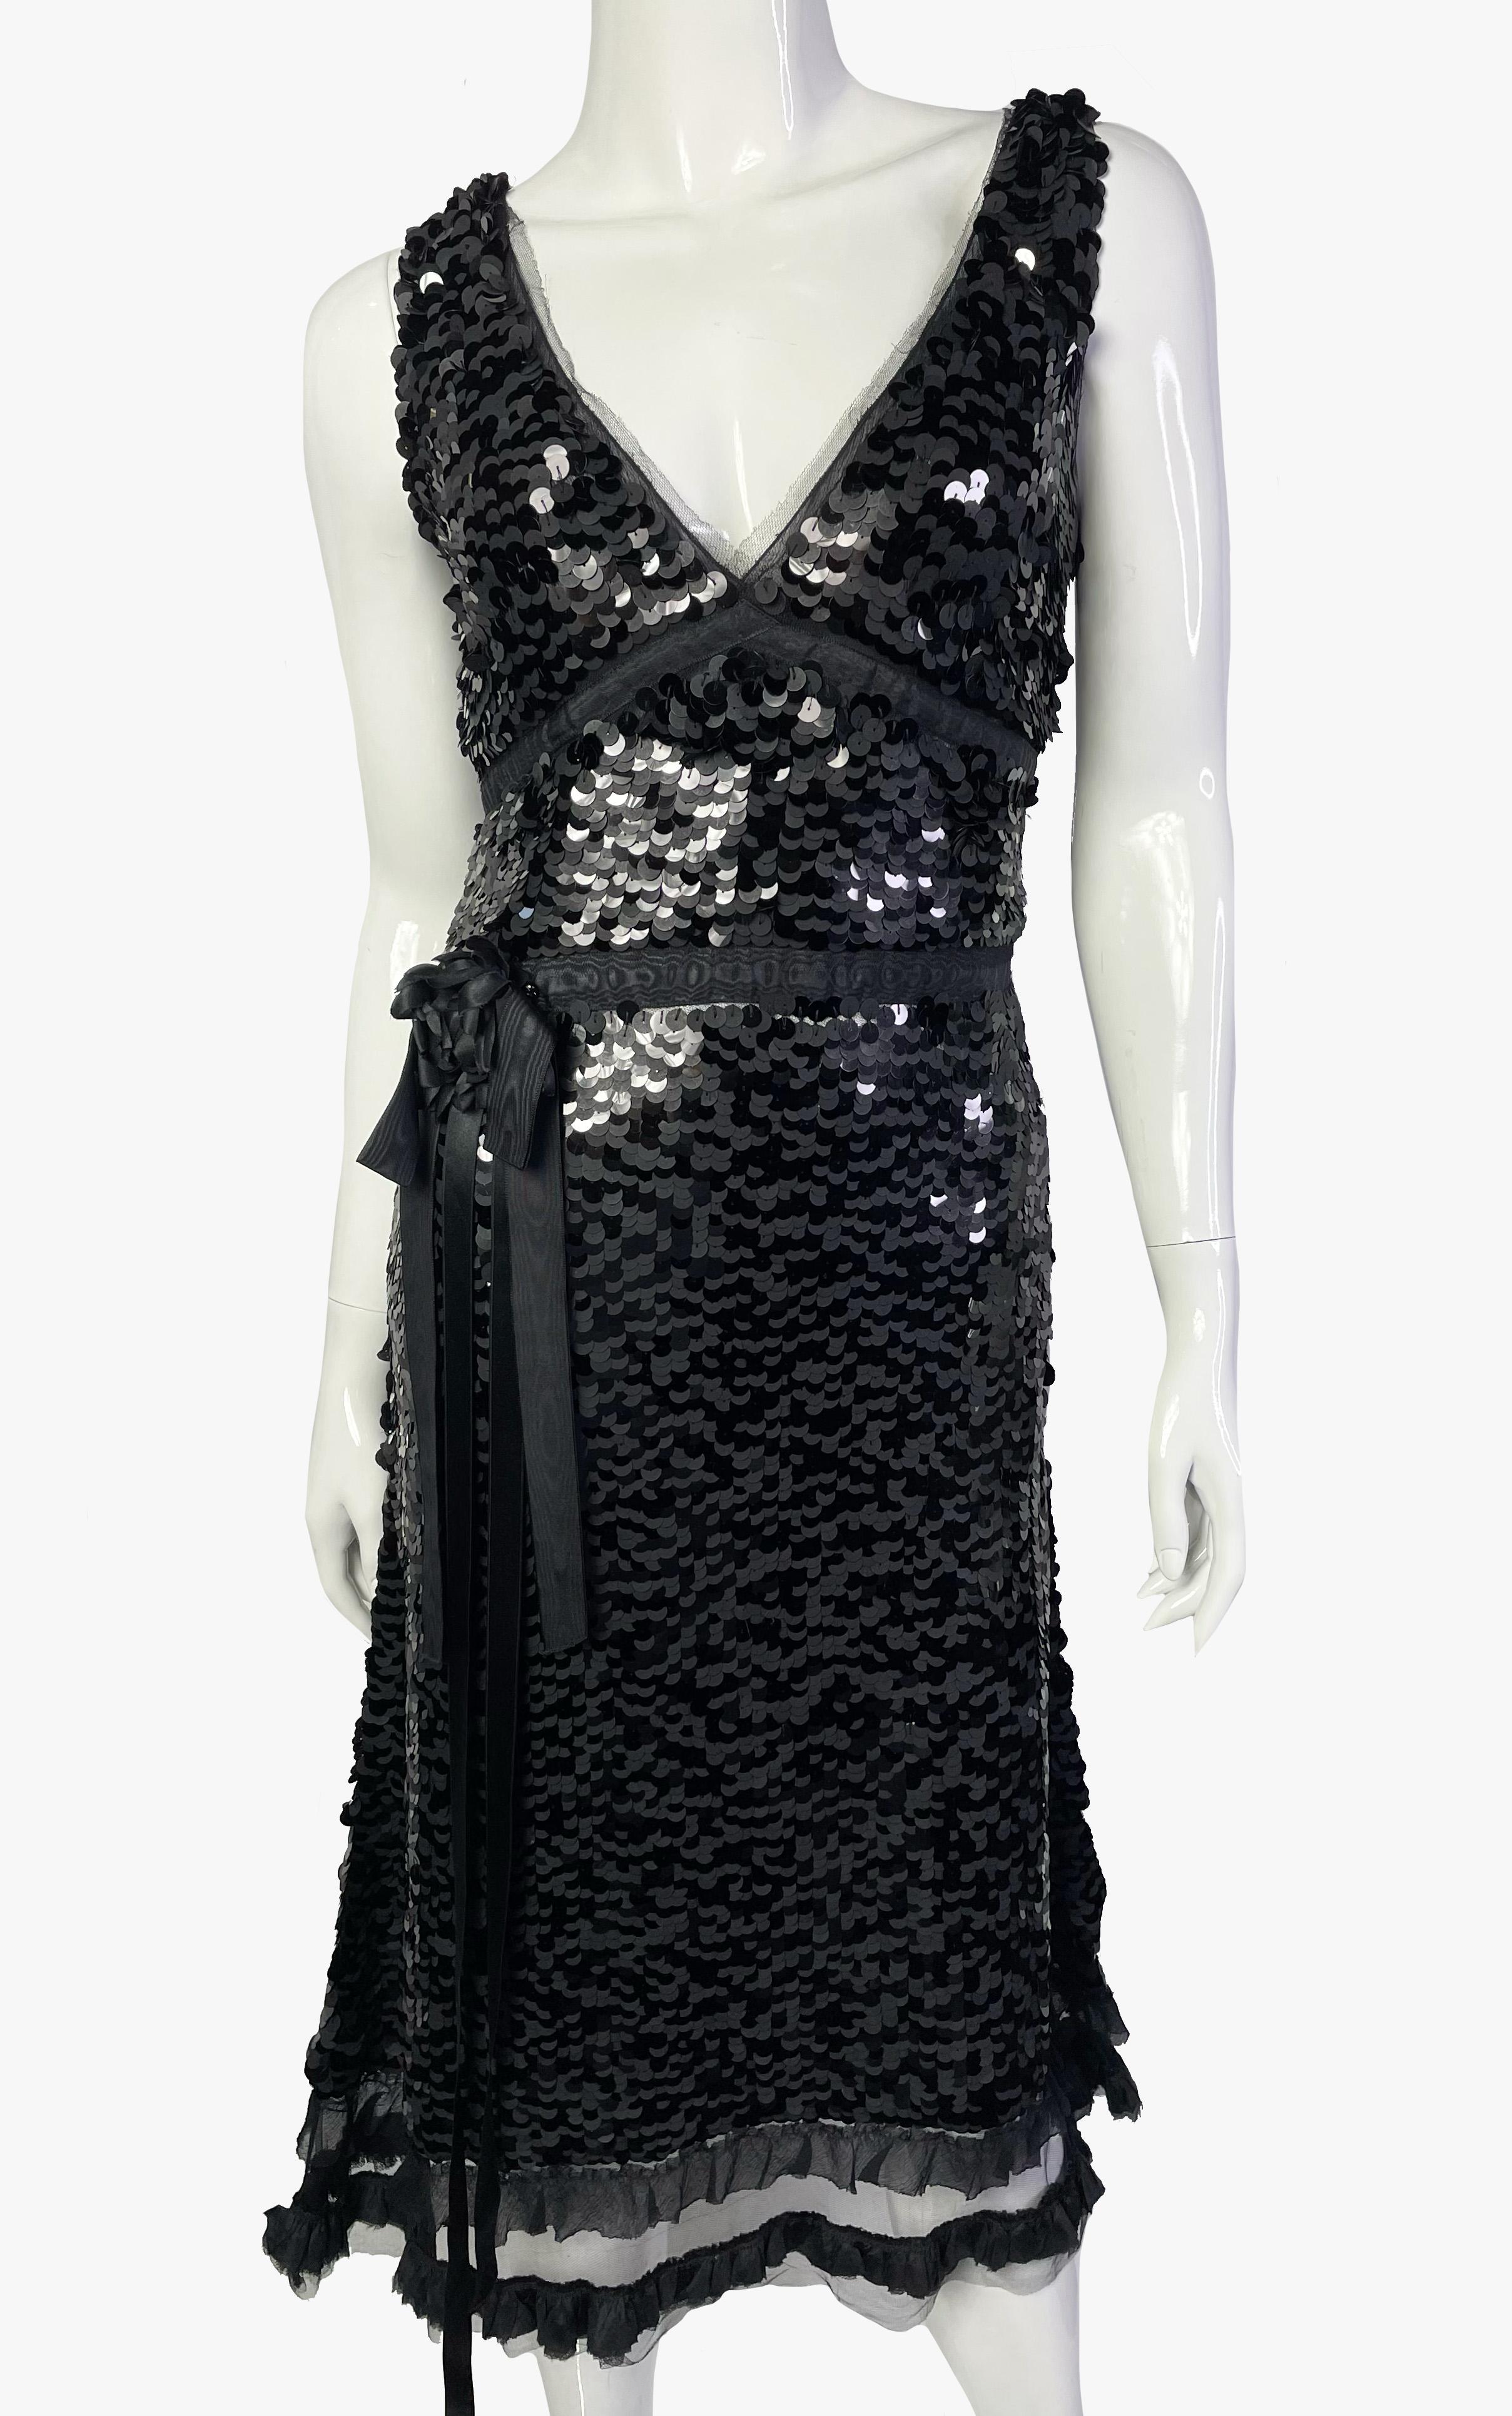 Prada evening cocktail black sleeveless silk dress with sequins.
V-neck, ribbon flower at the waist
Size – IT 42 / S-M
Length – 112 cm
Waist – 70 cm
From armpit to armpit – 46 cm
Fabric – 84% silk, 16% nylon

Condition – very